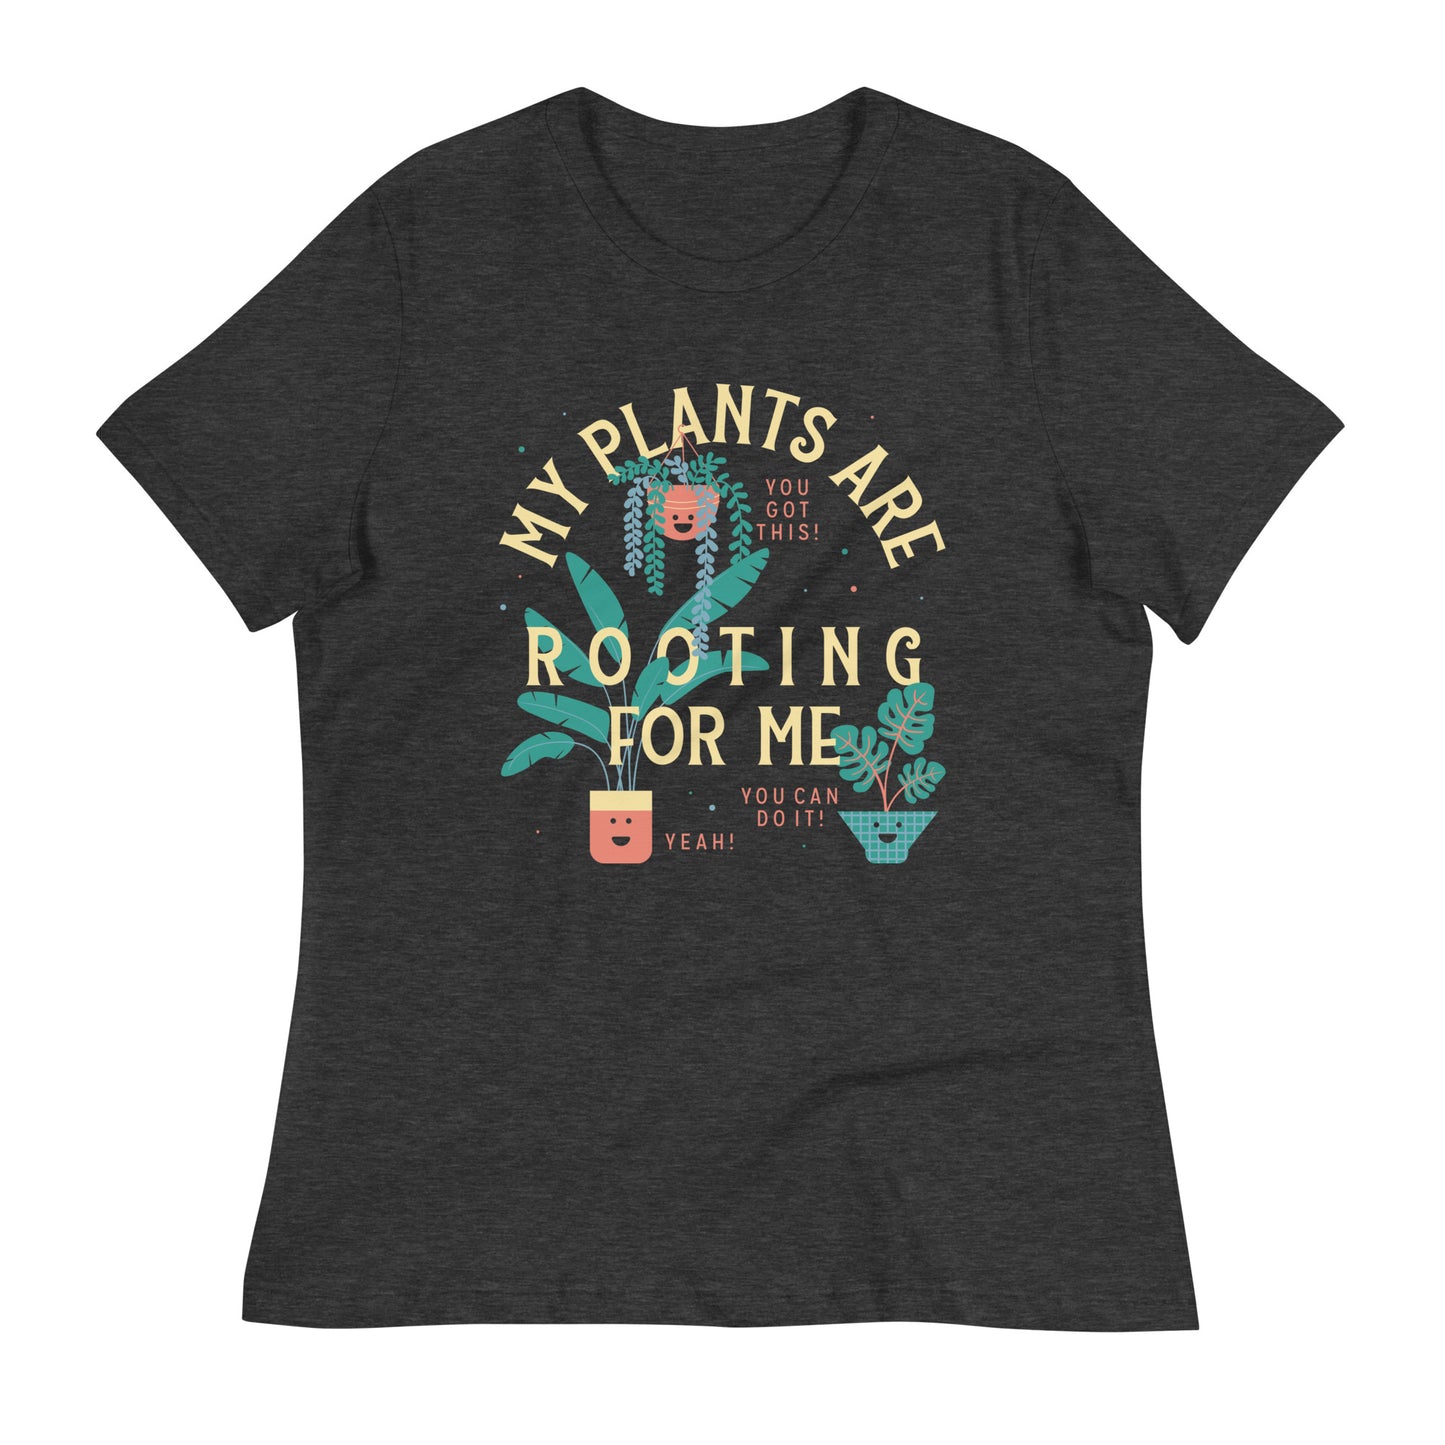 My Plants Are Rooting For Me Women's Signature Tee